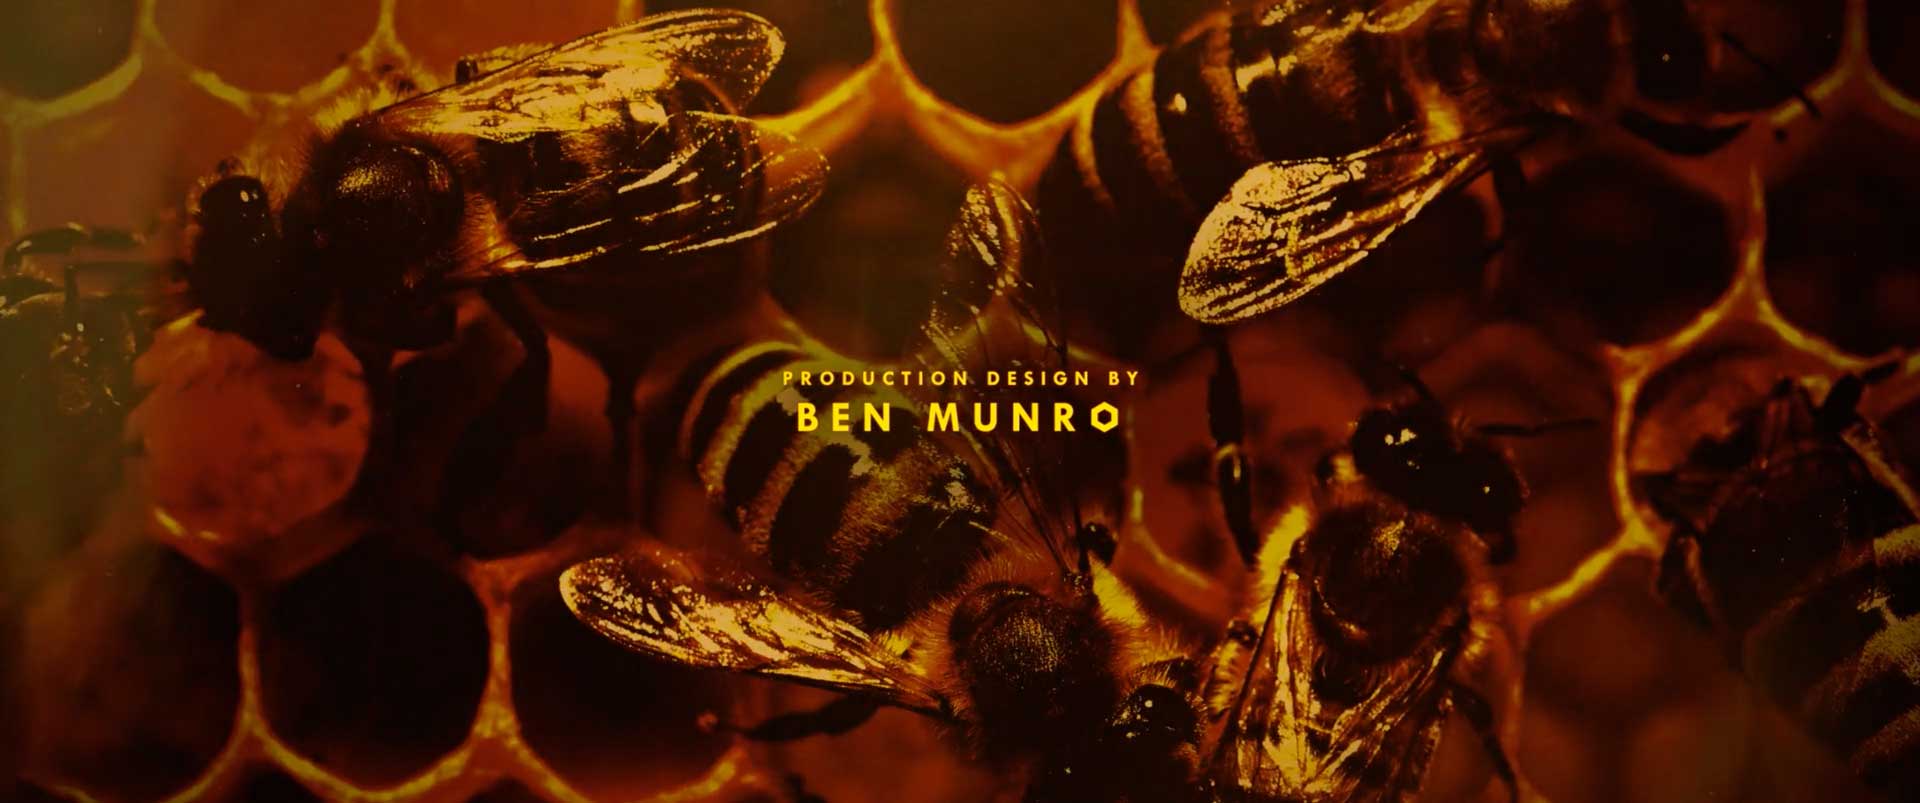 The Beekeeper Main Titles by Filmograph | STASH MAGAZINE